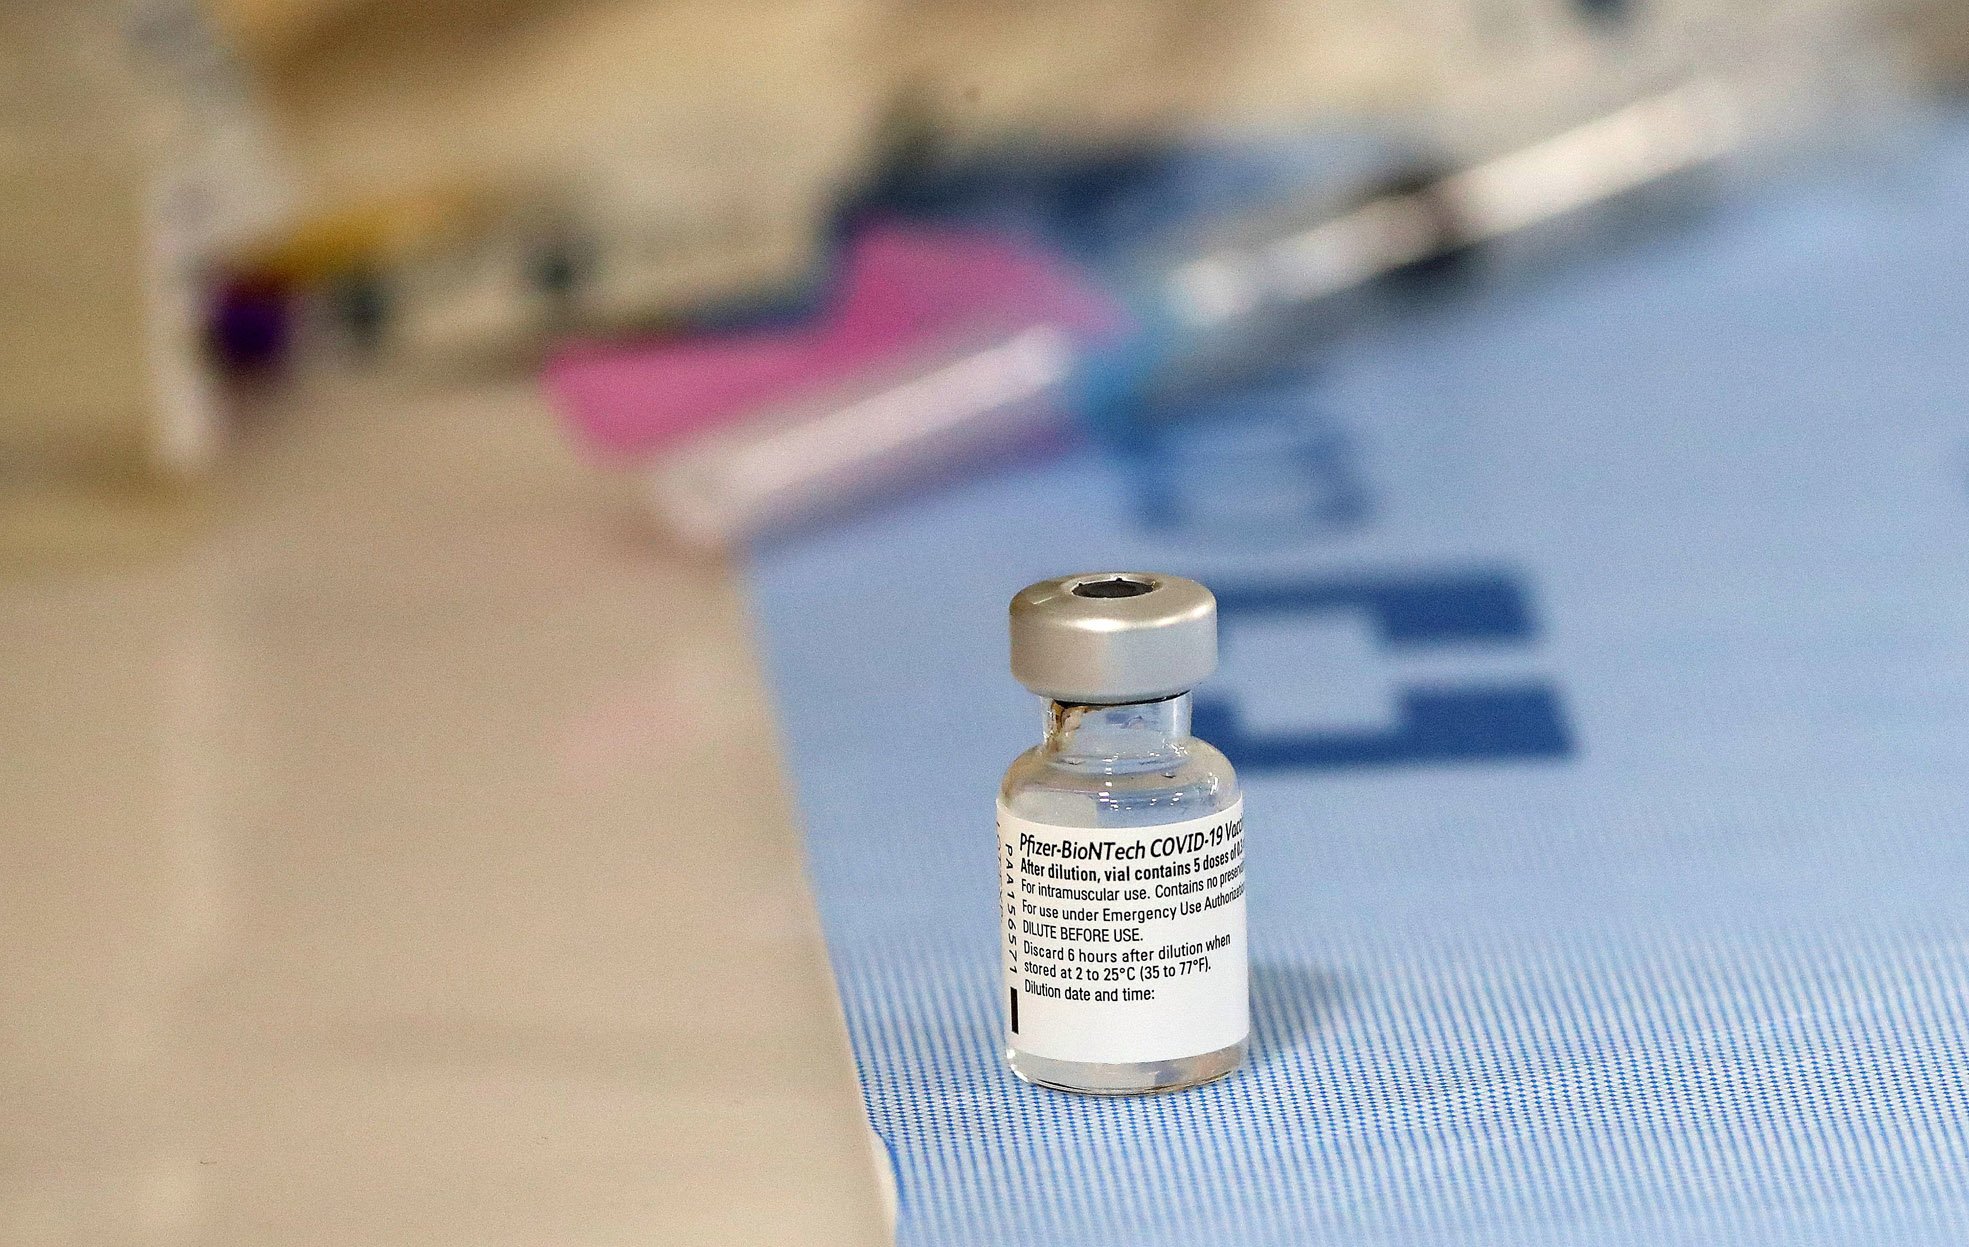 Toronto to continue 'wartime effort' of vaccinating through the holidays